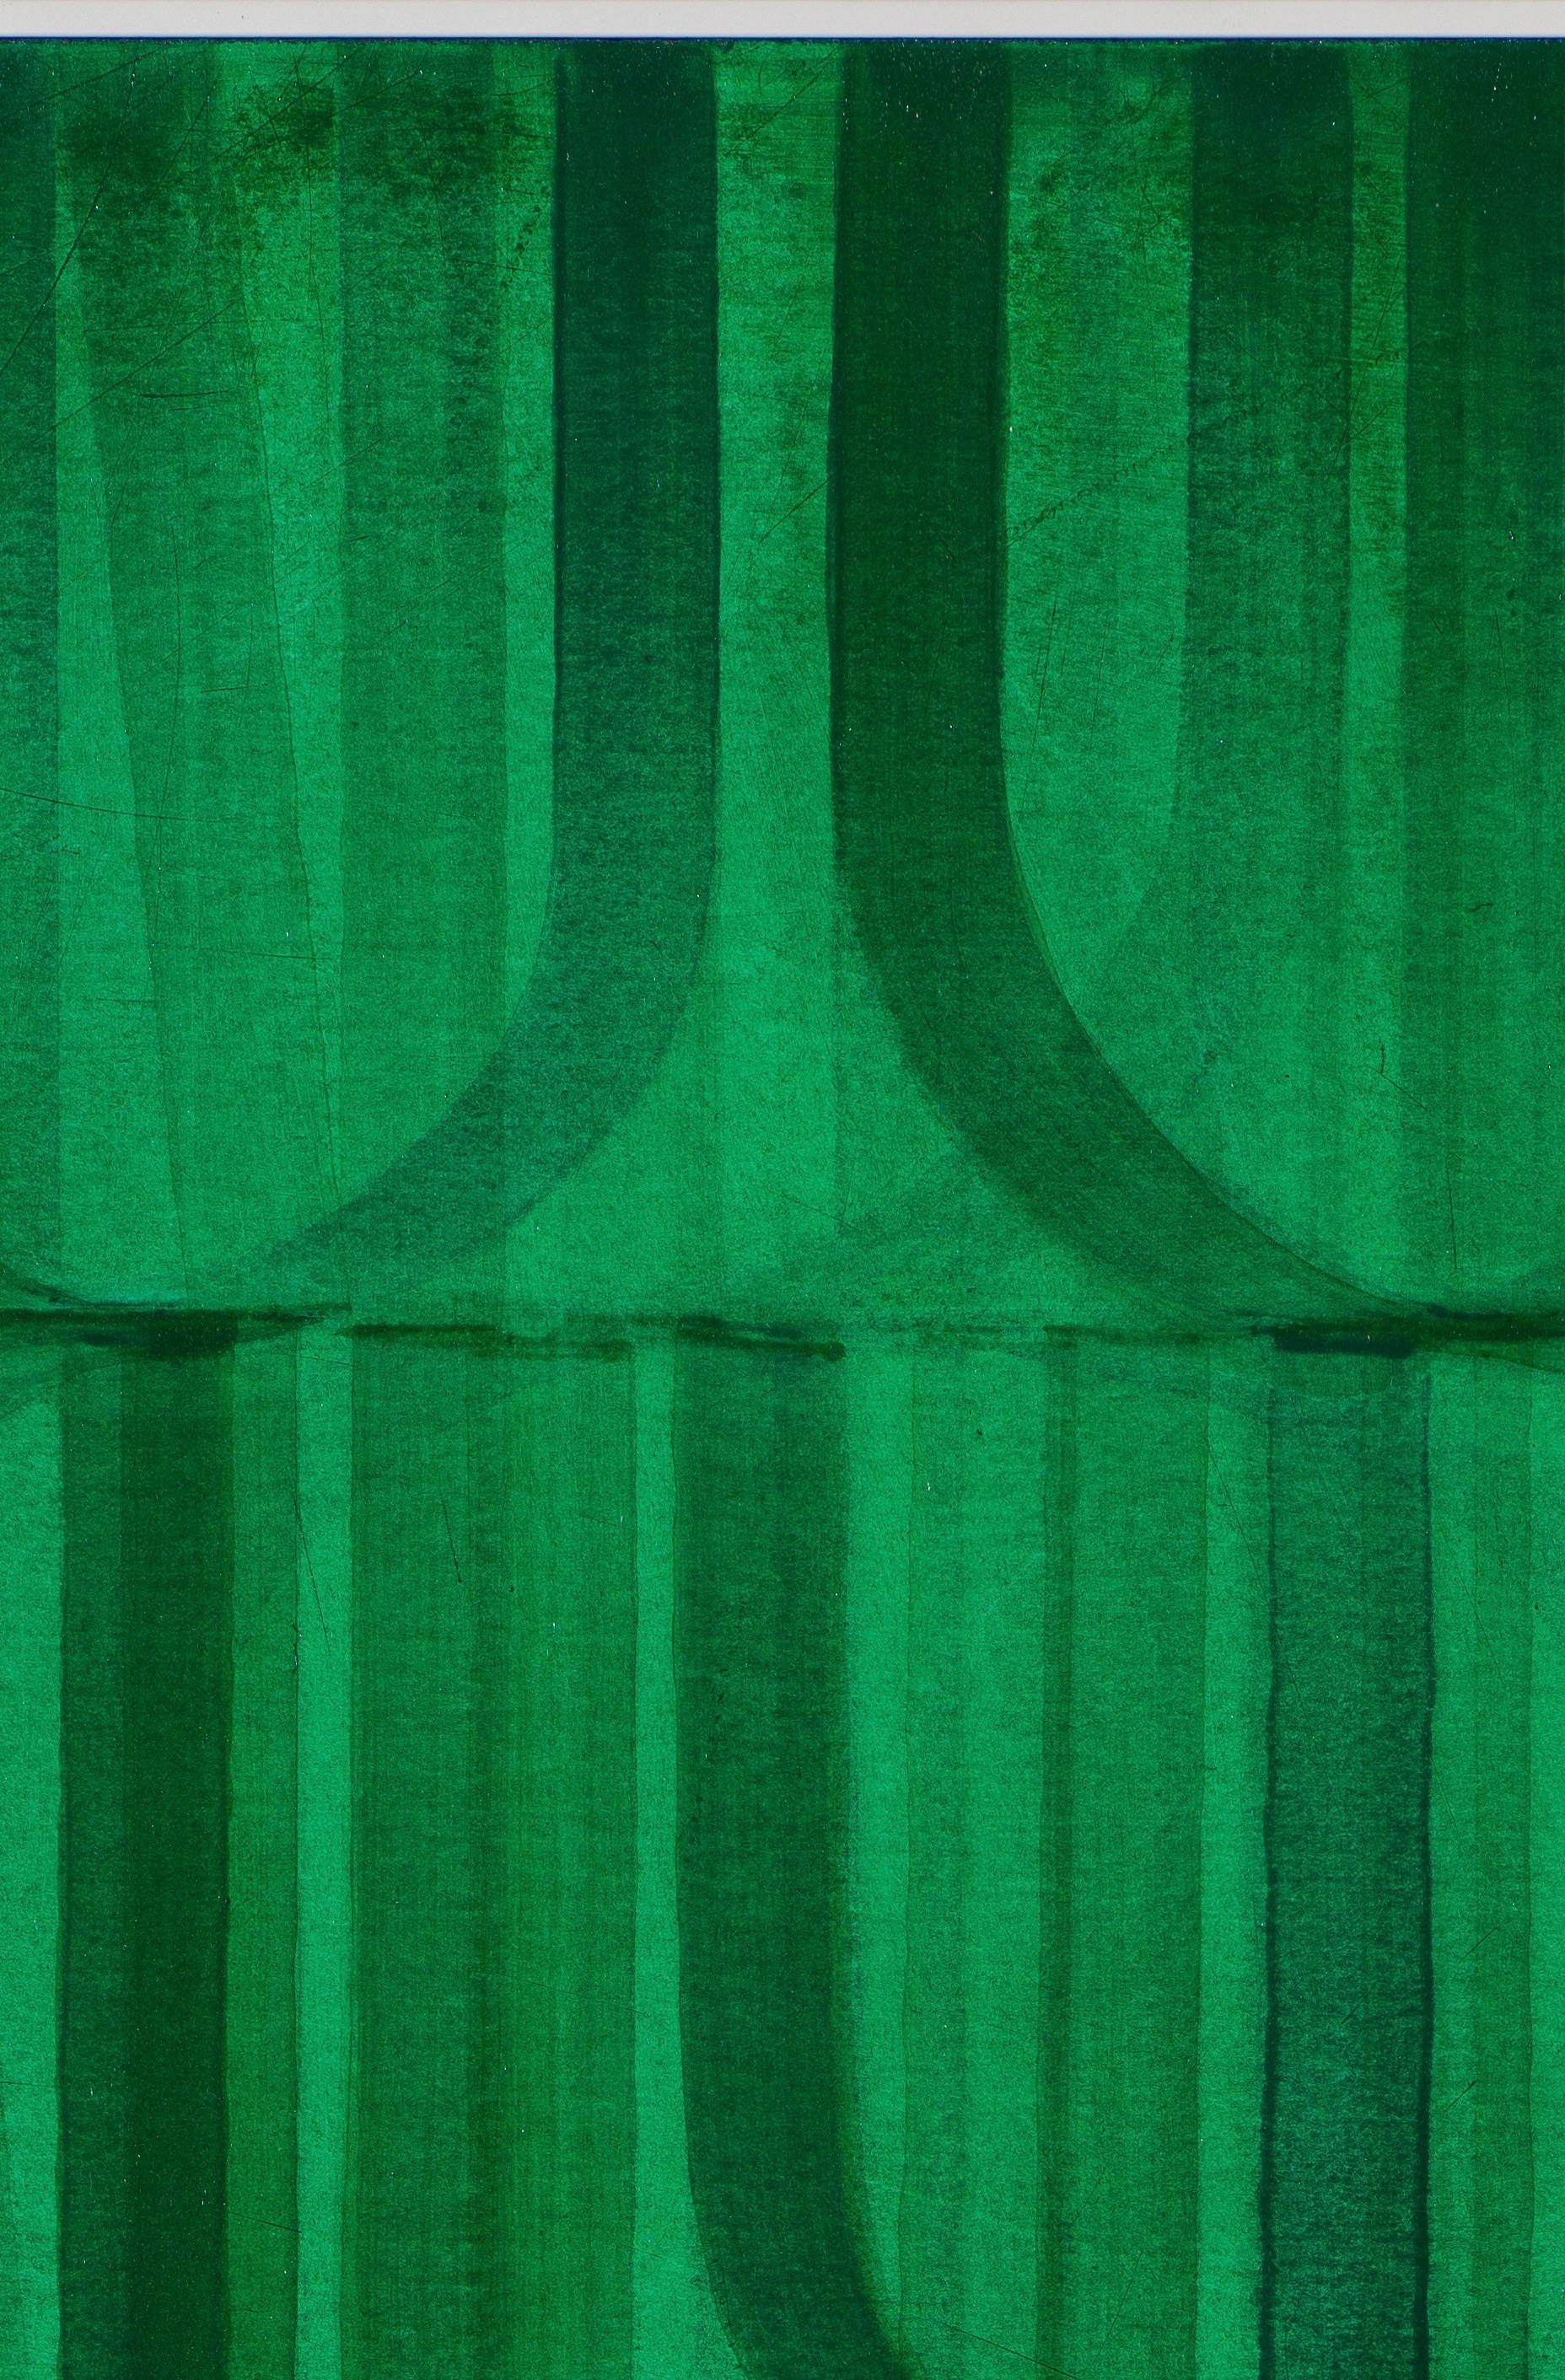 Green #2 - Painting by Michael Marlowe